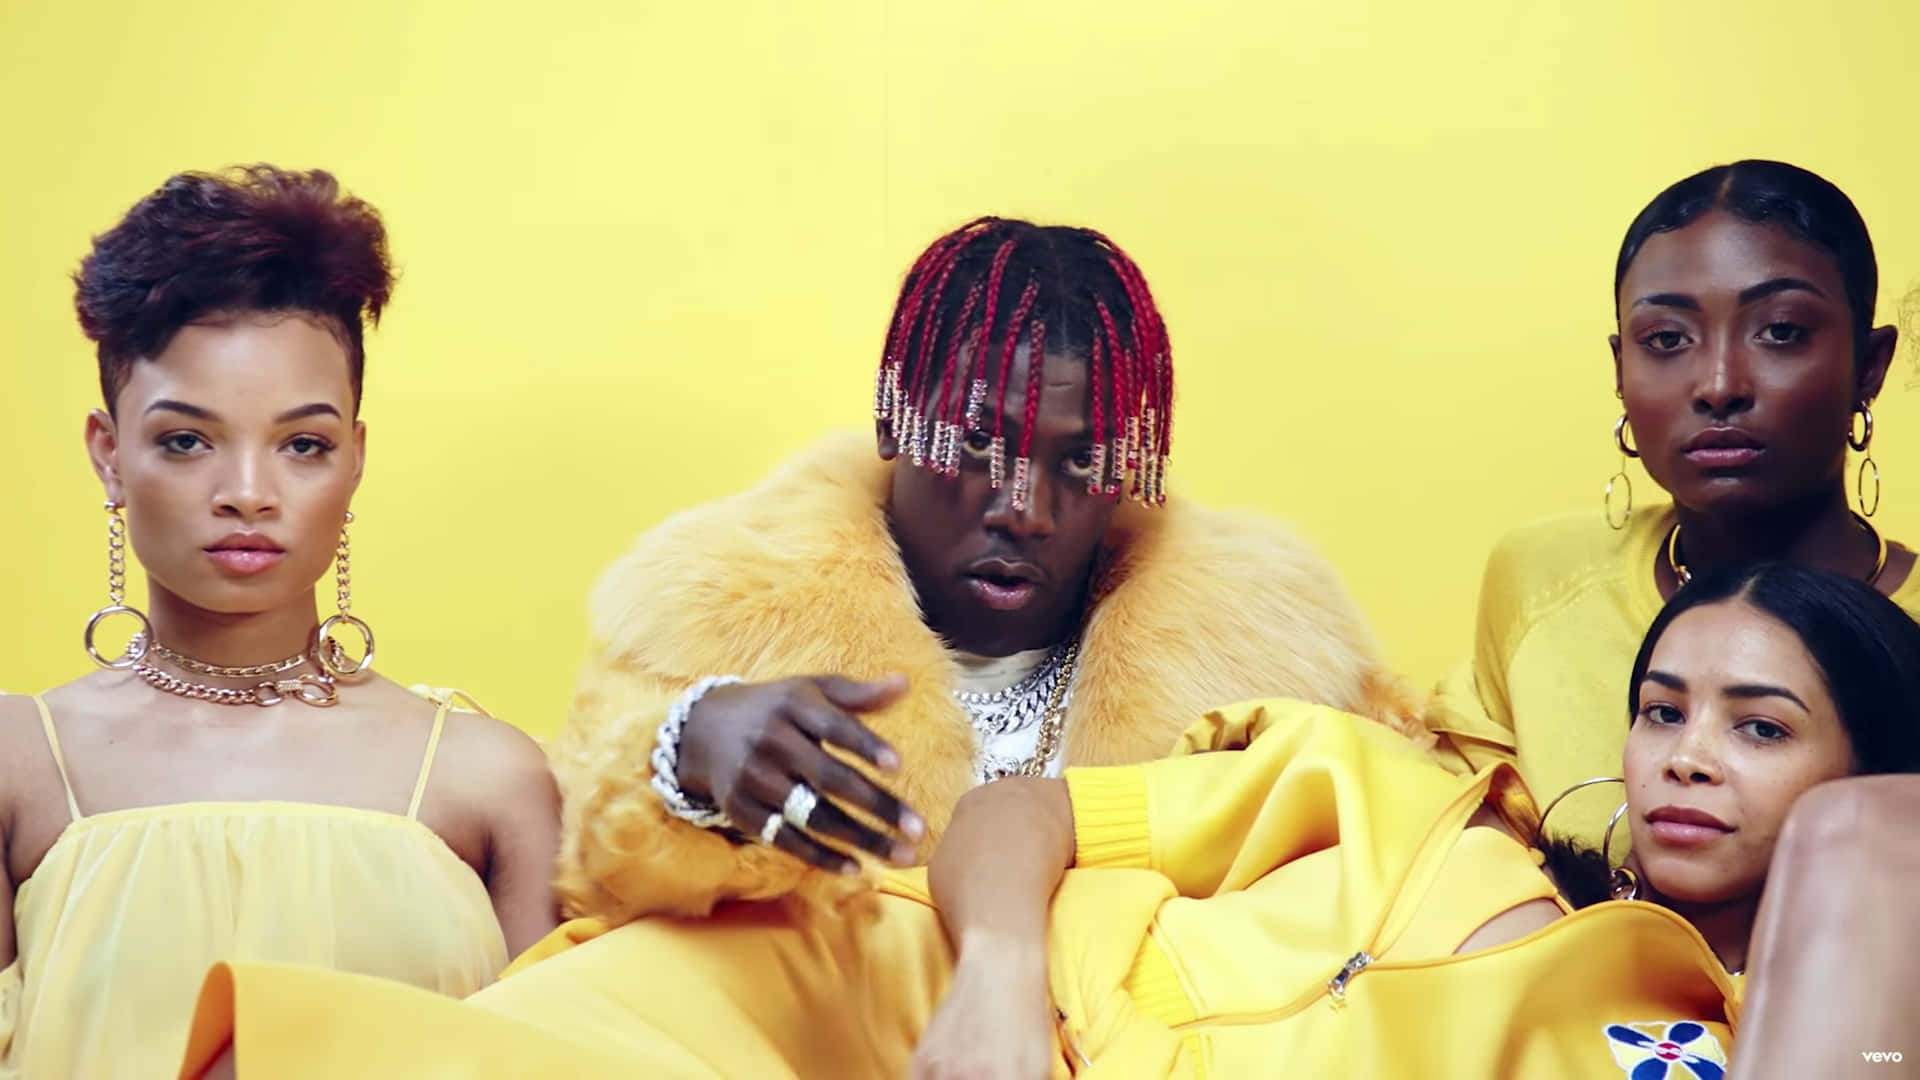 "Lil Yachty looking stylish with his signature braids" Wallpaper